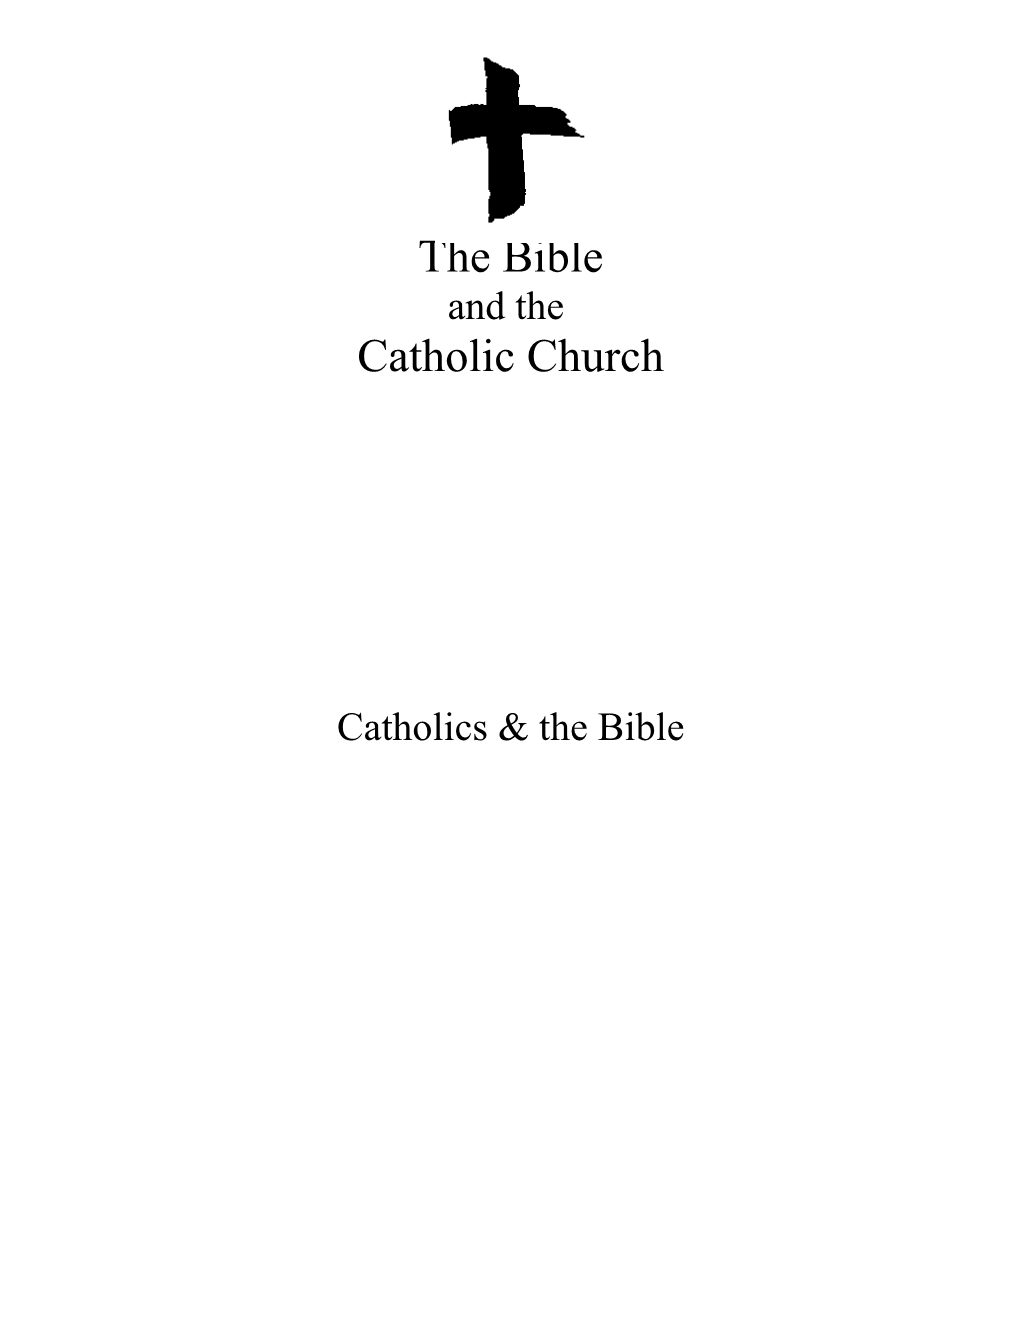 Catholics and the Bible